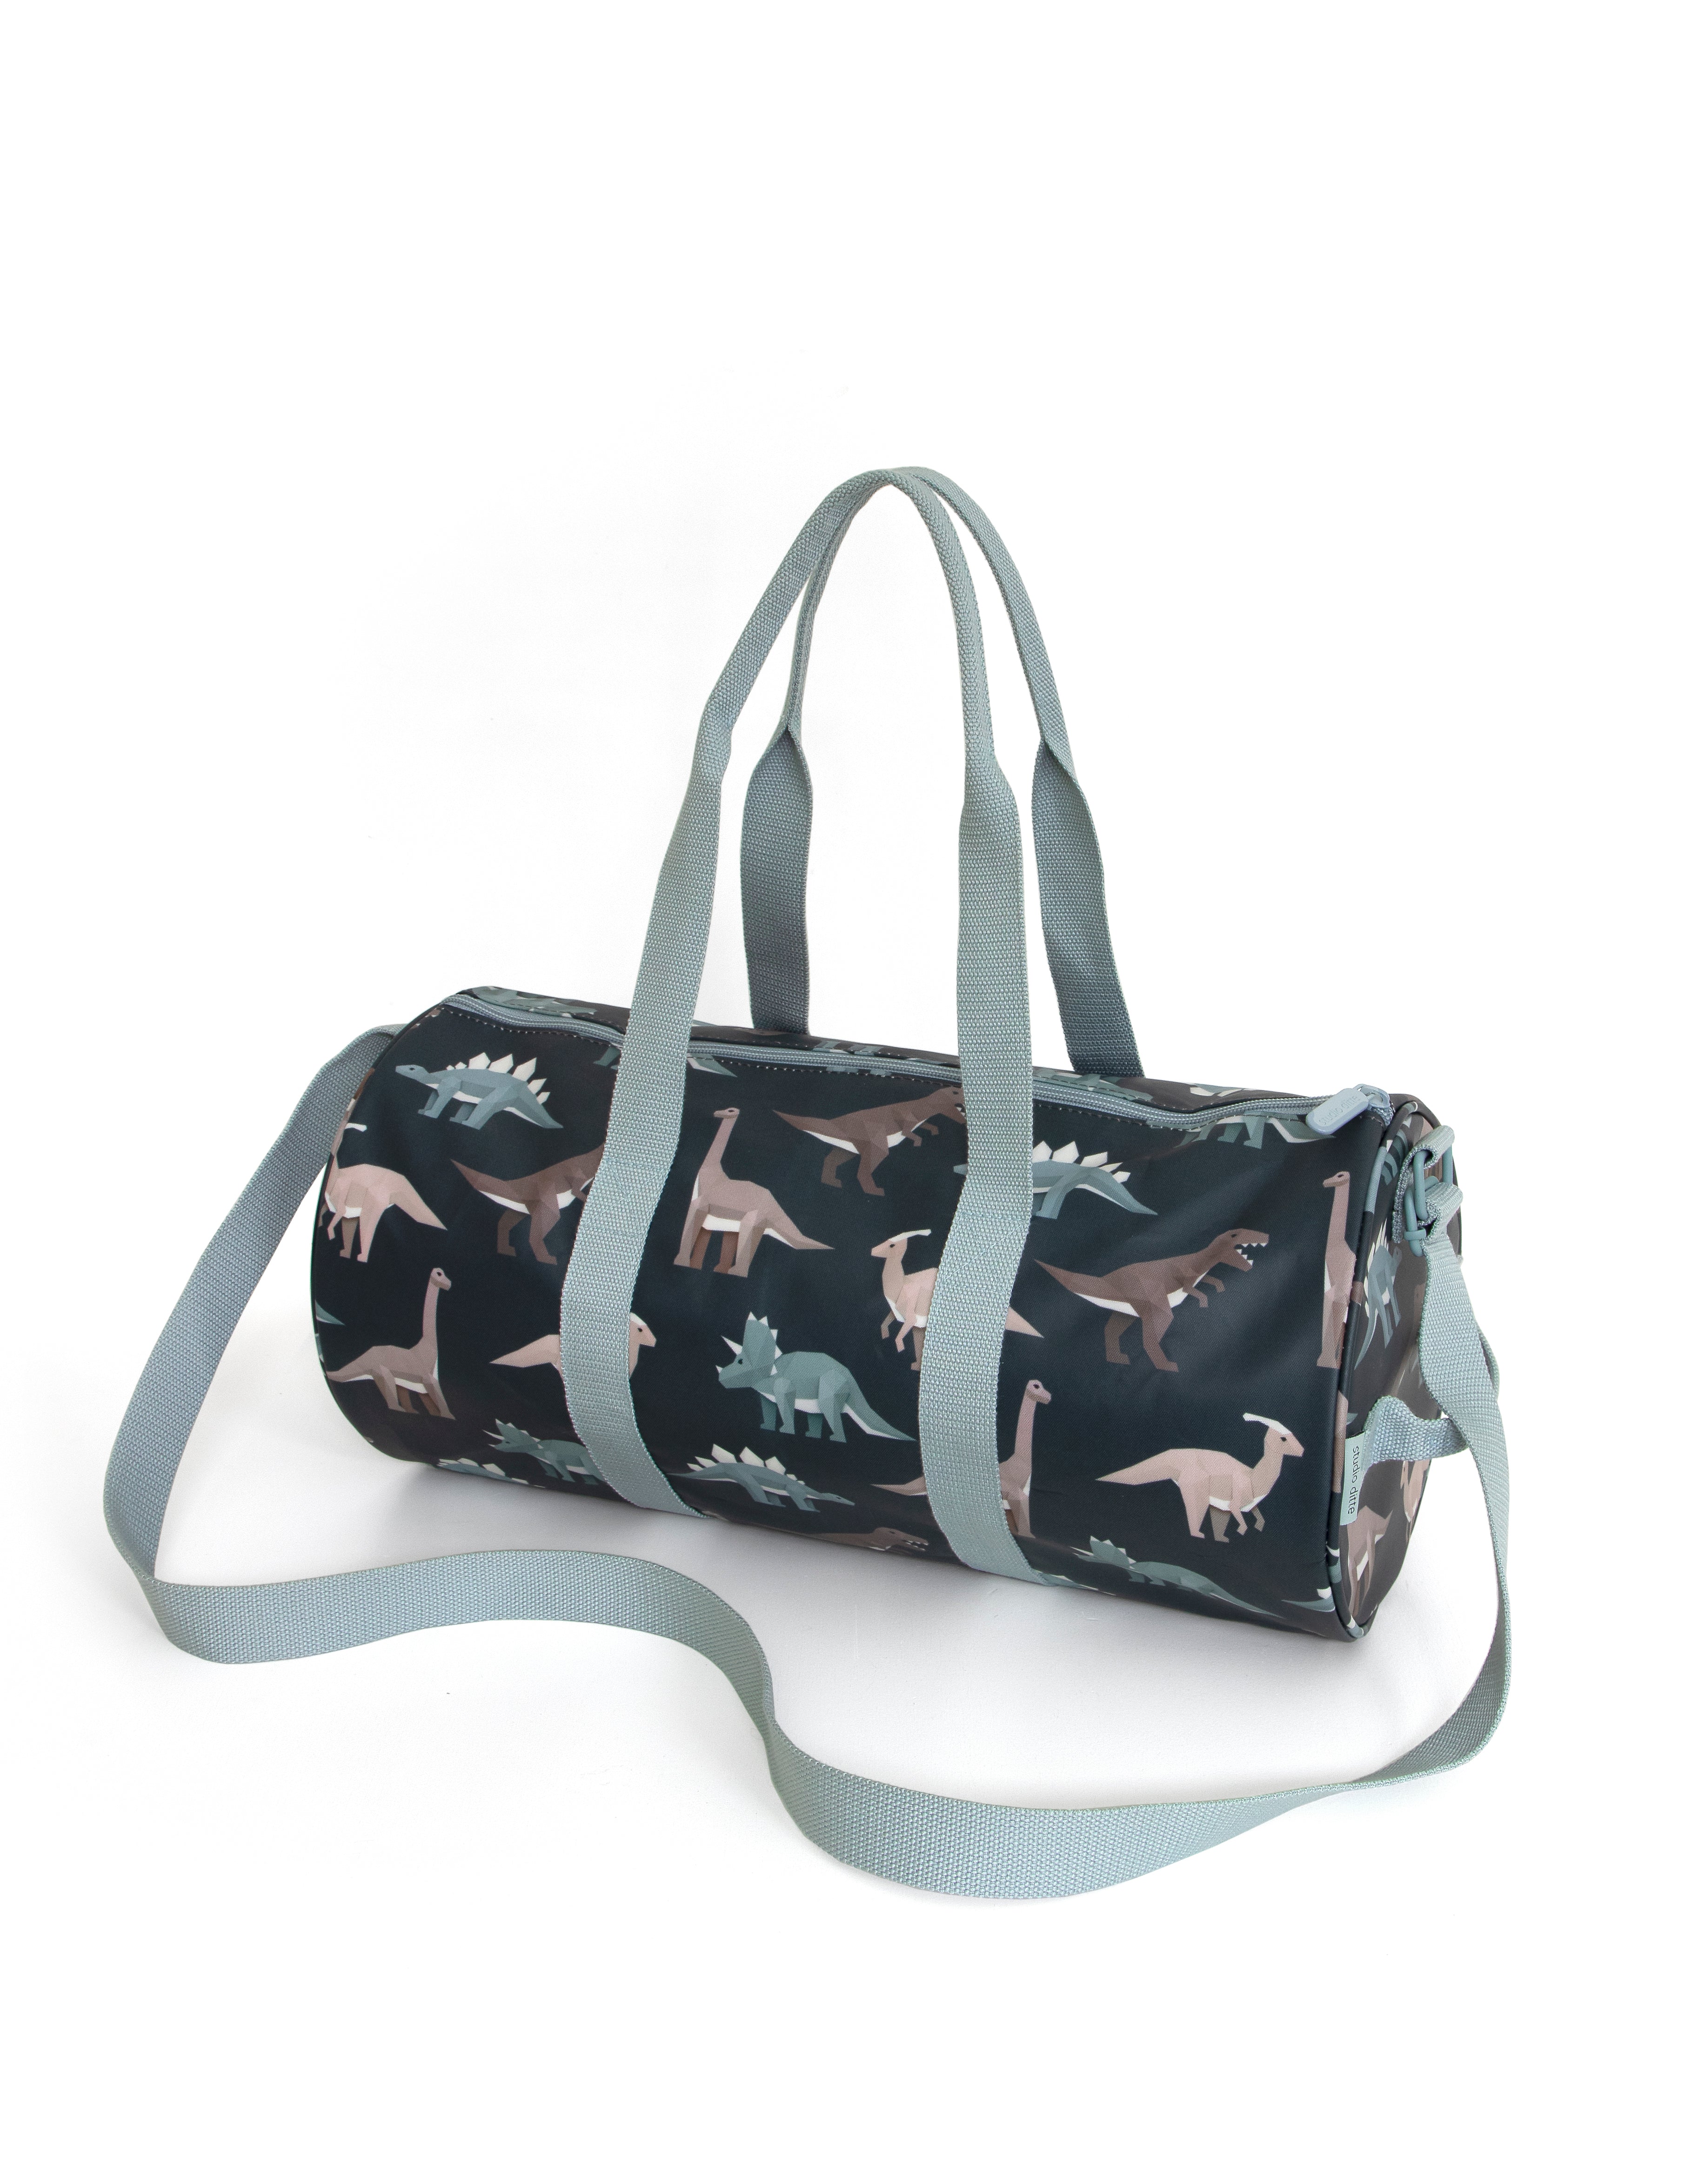 Recycled sports and travel bag - Dinosaurs